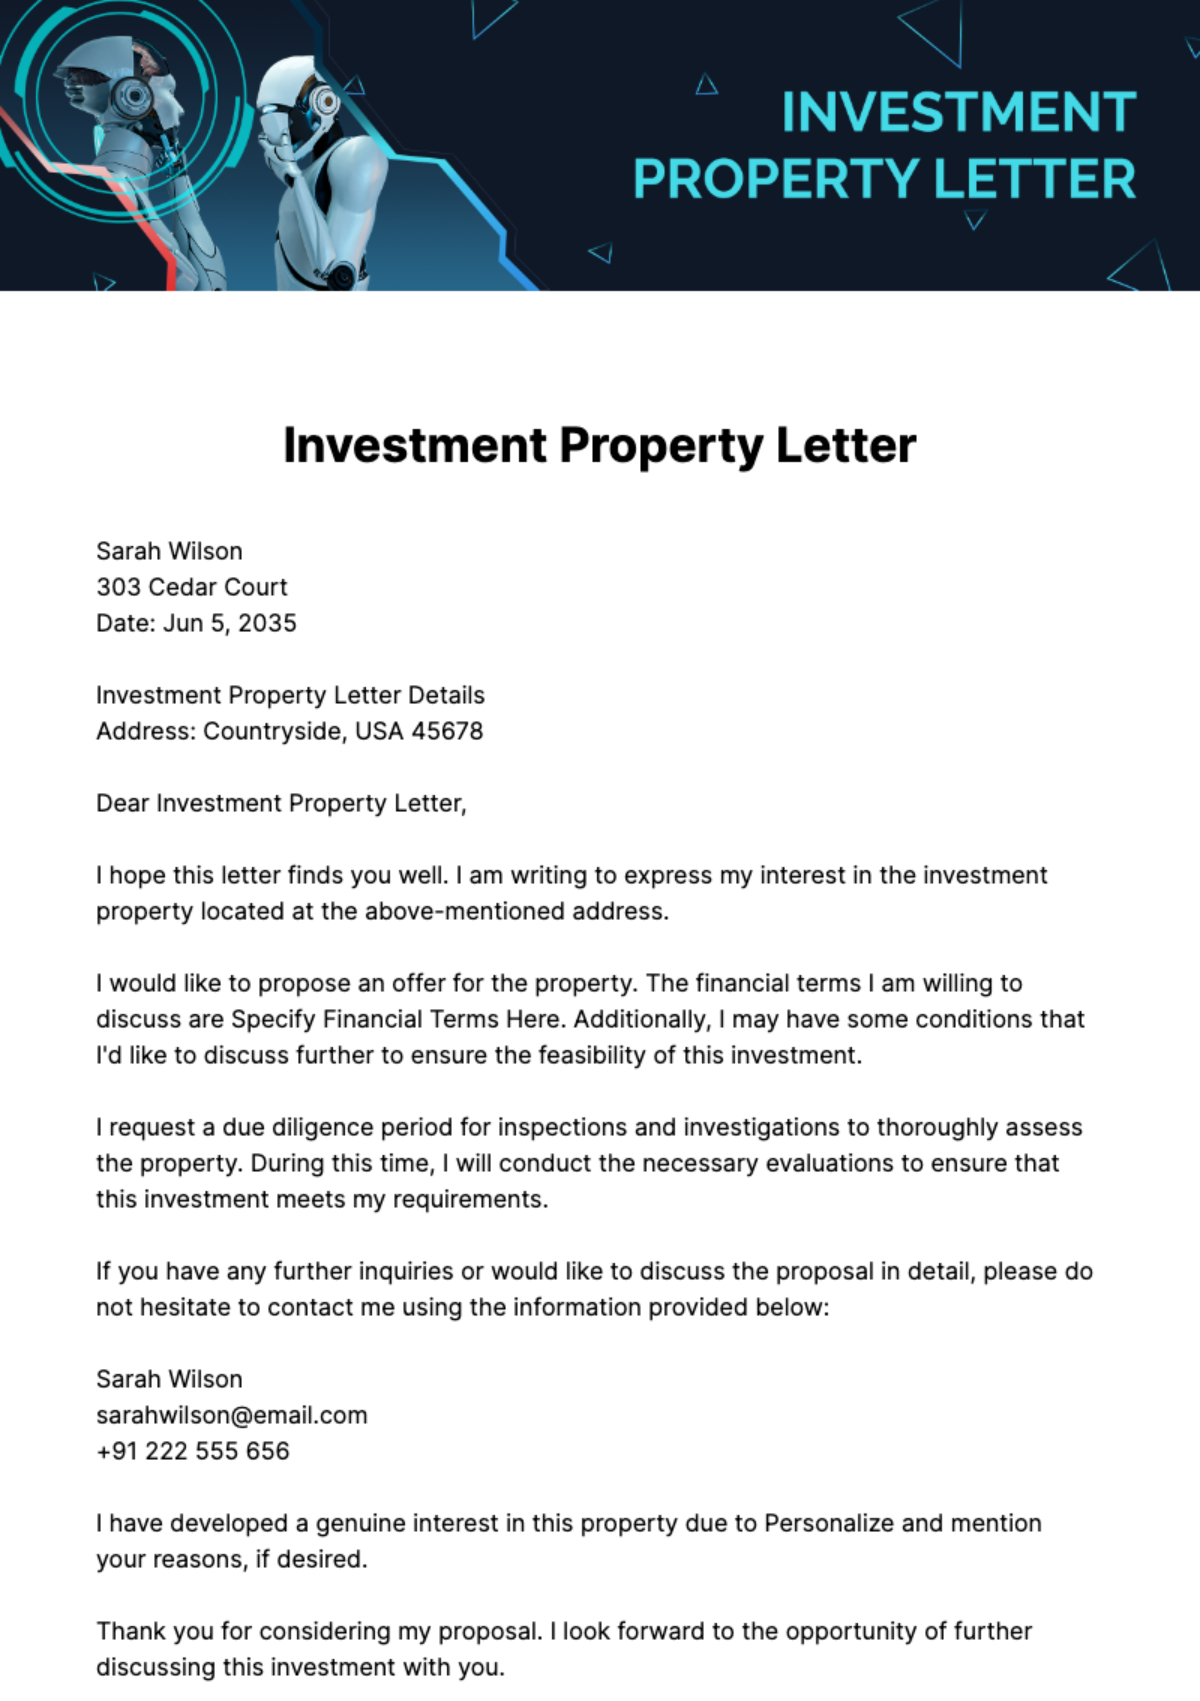 Free Investment Property Letter Template